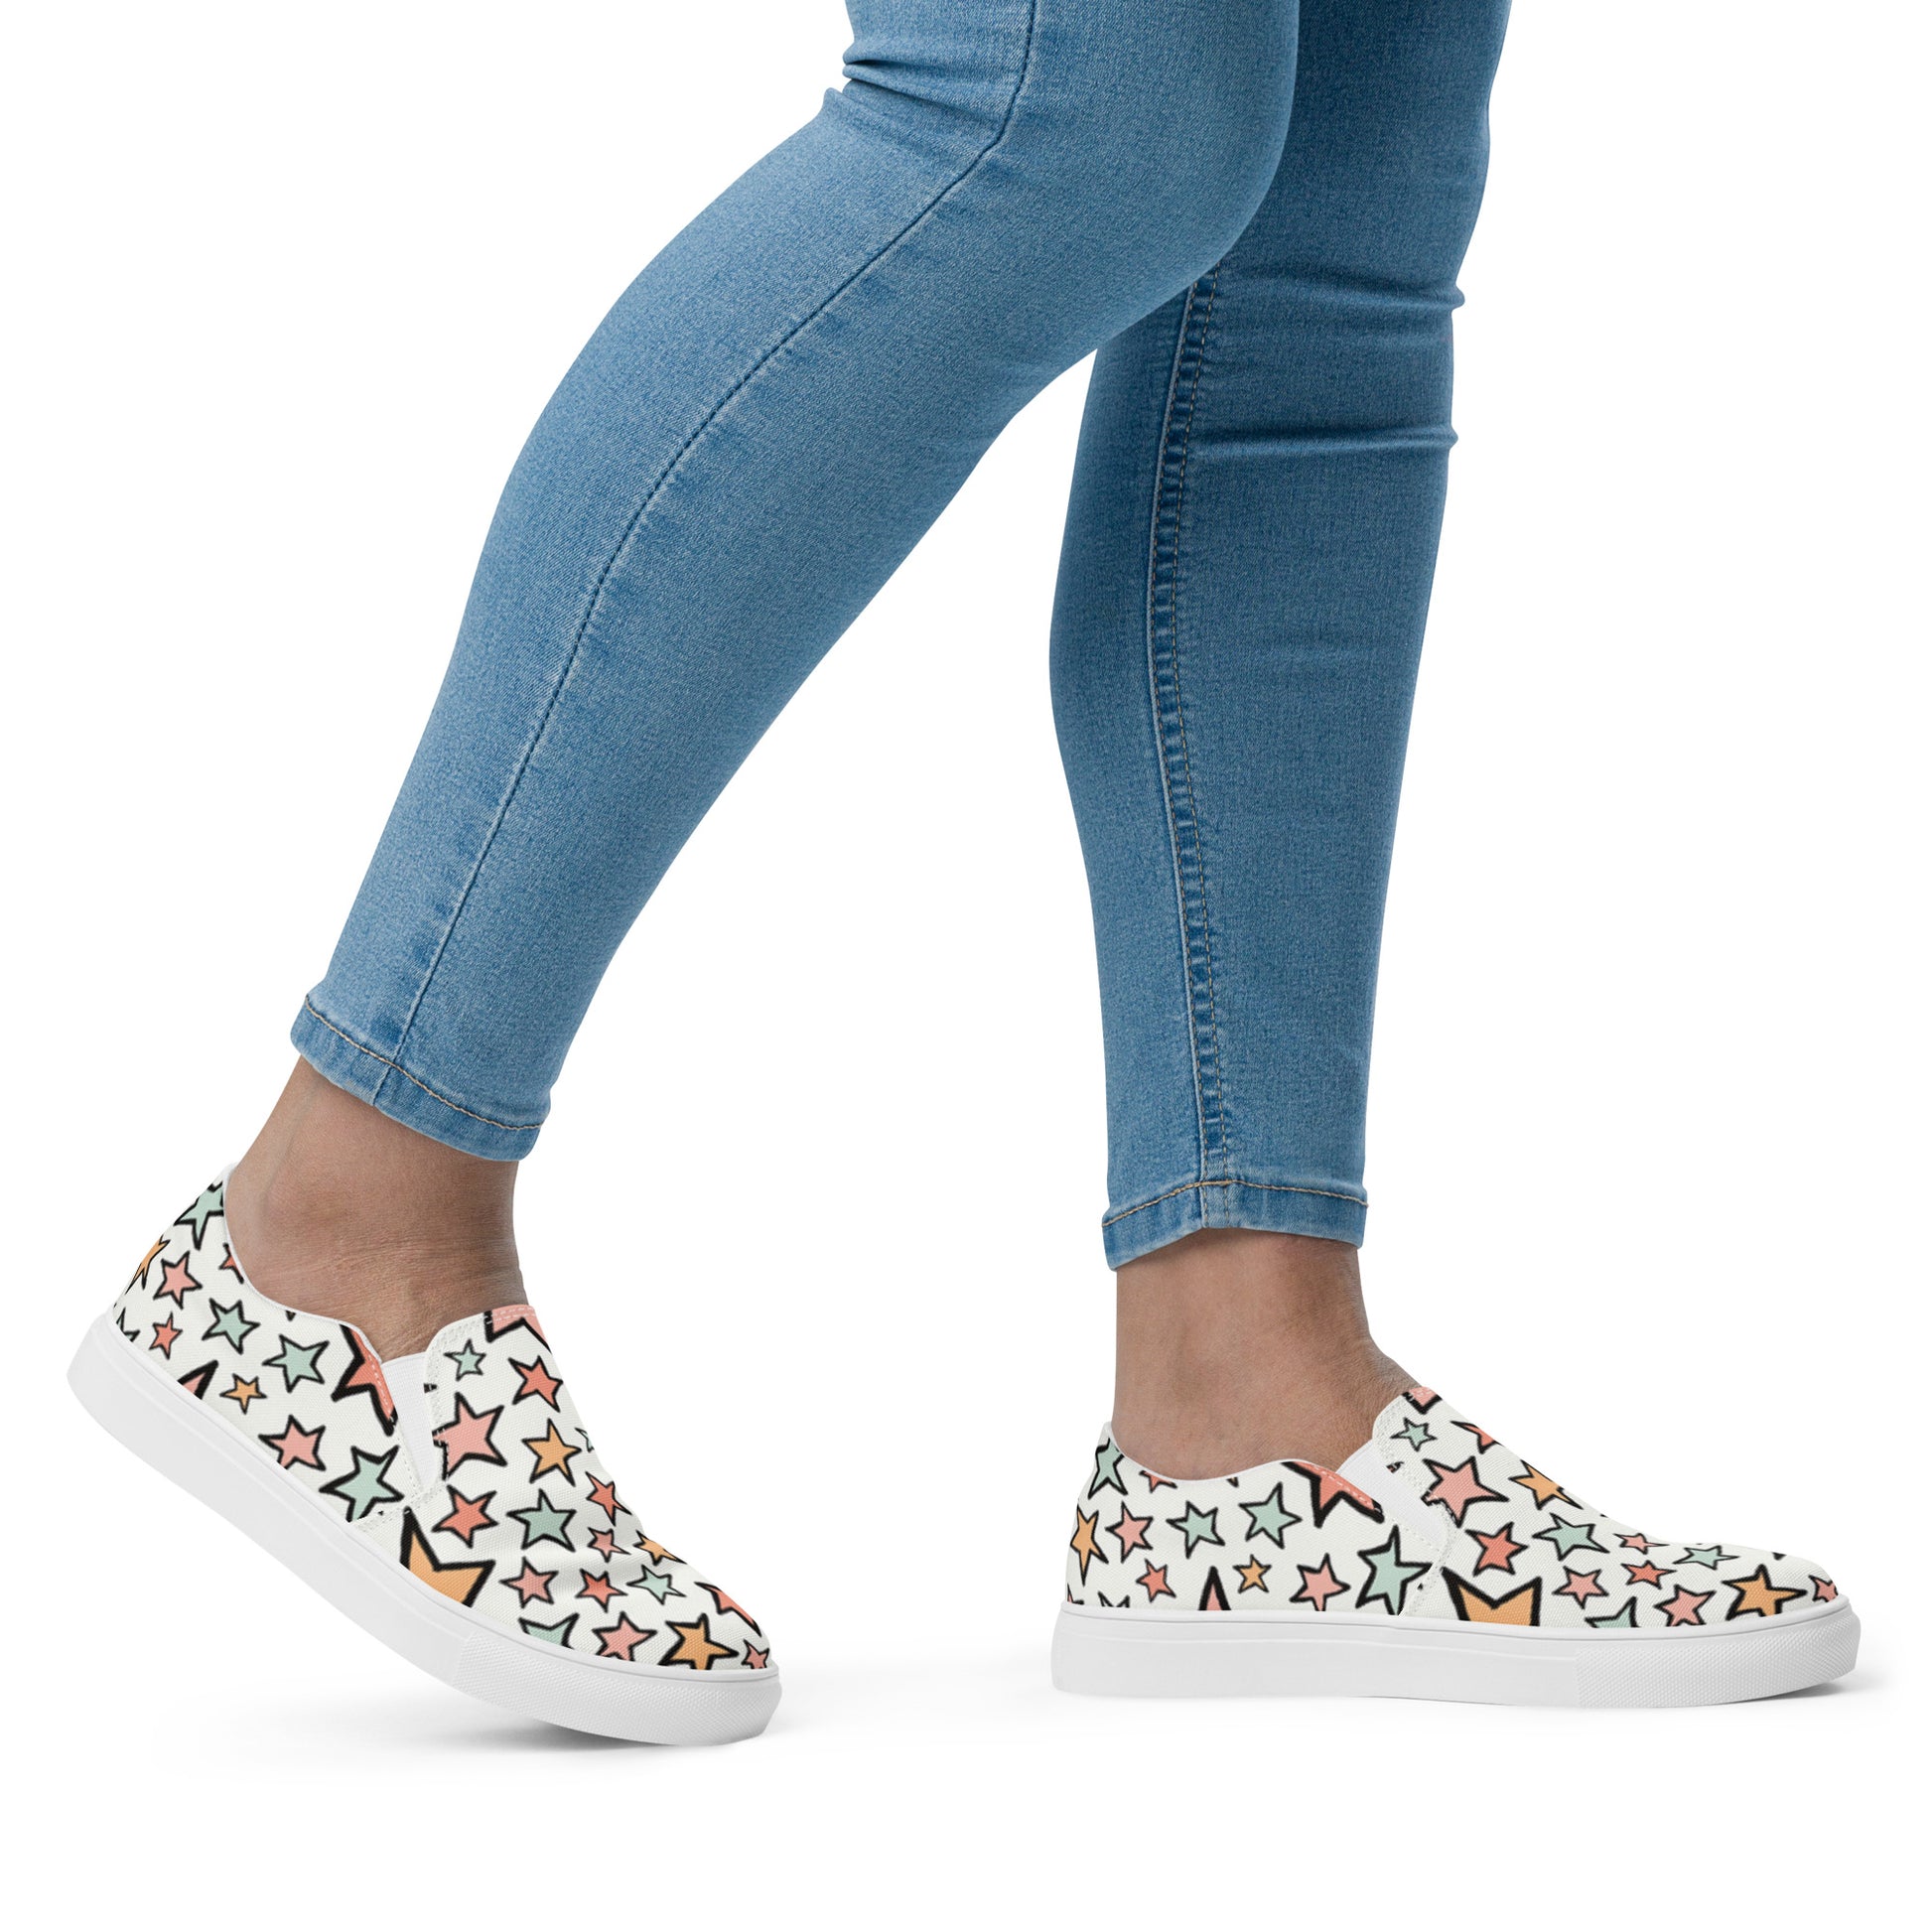 Twinkle Toes Star Pattern Shoes